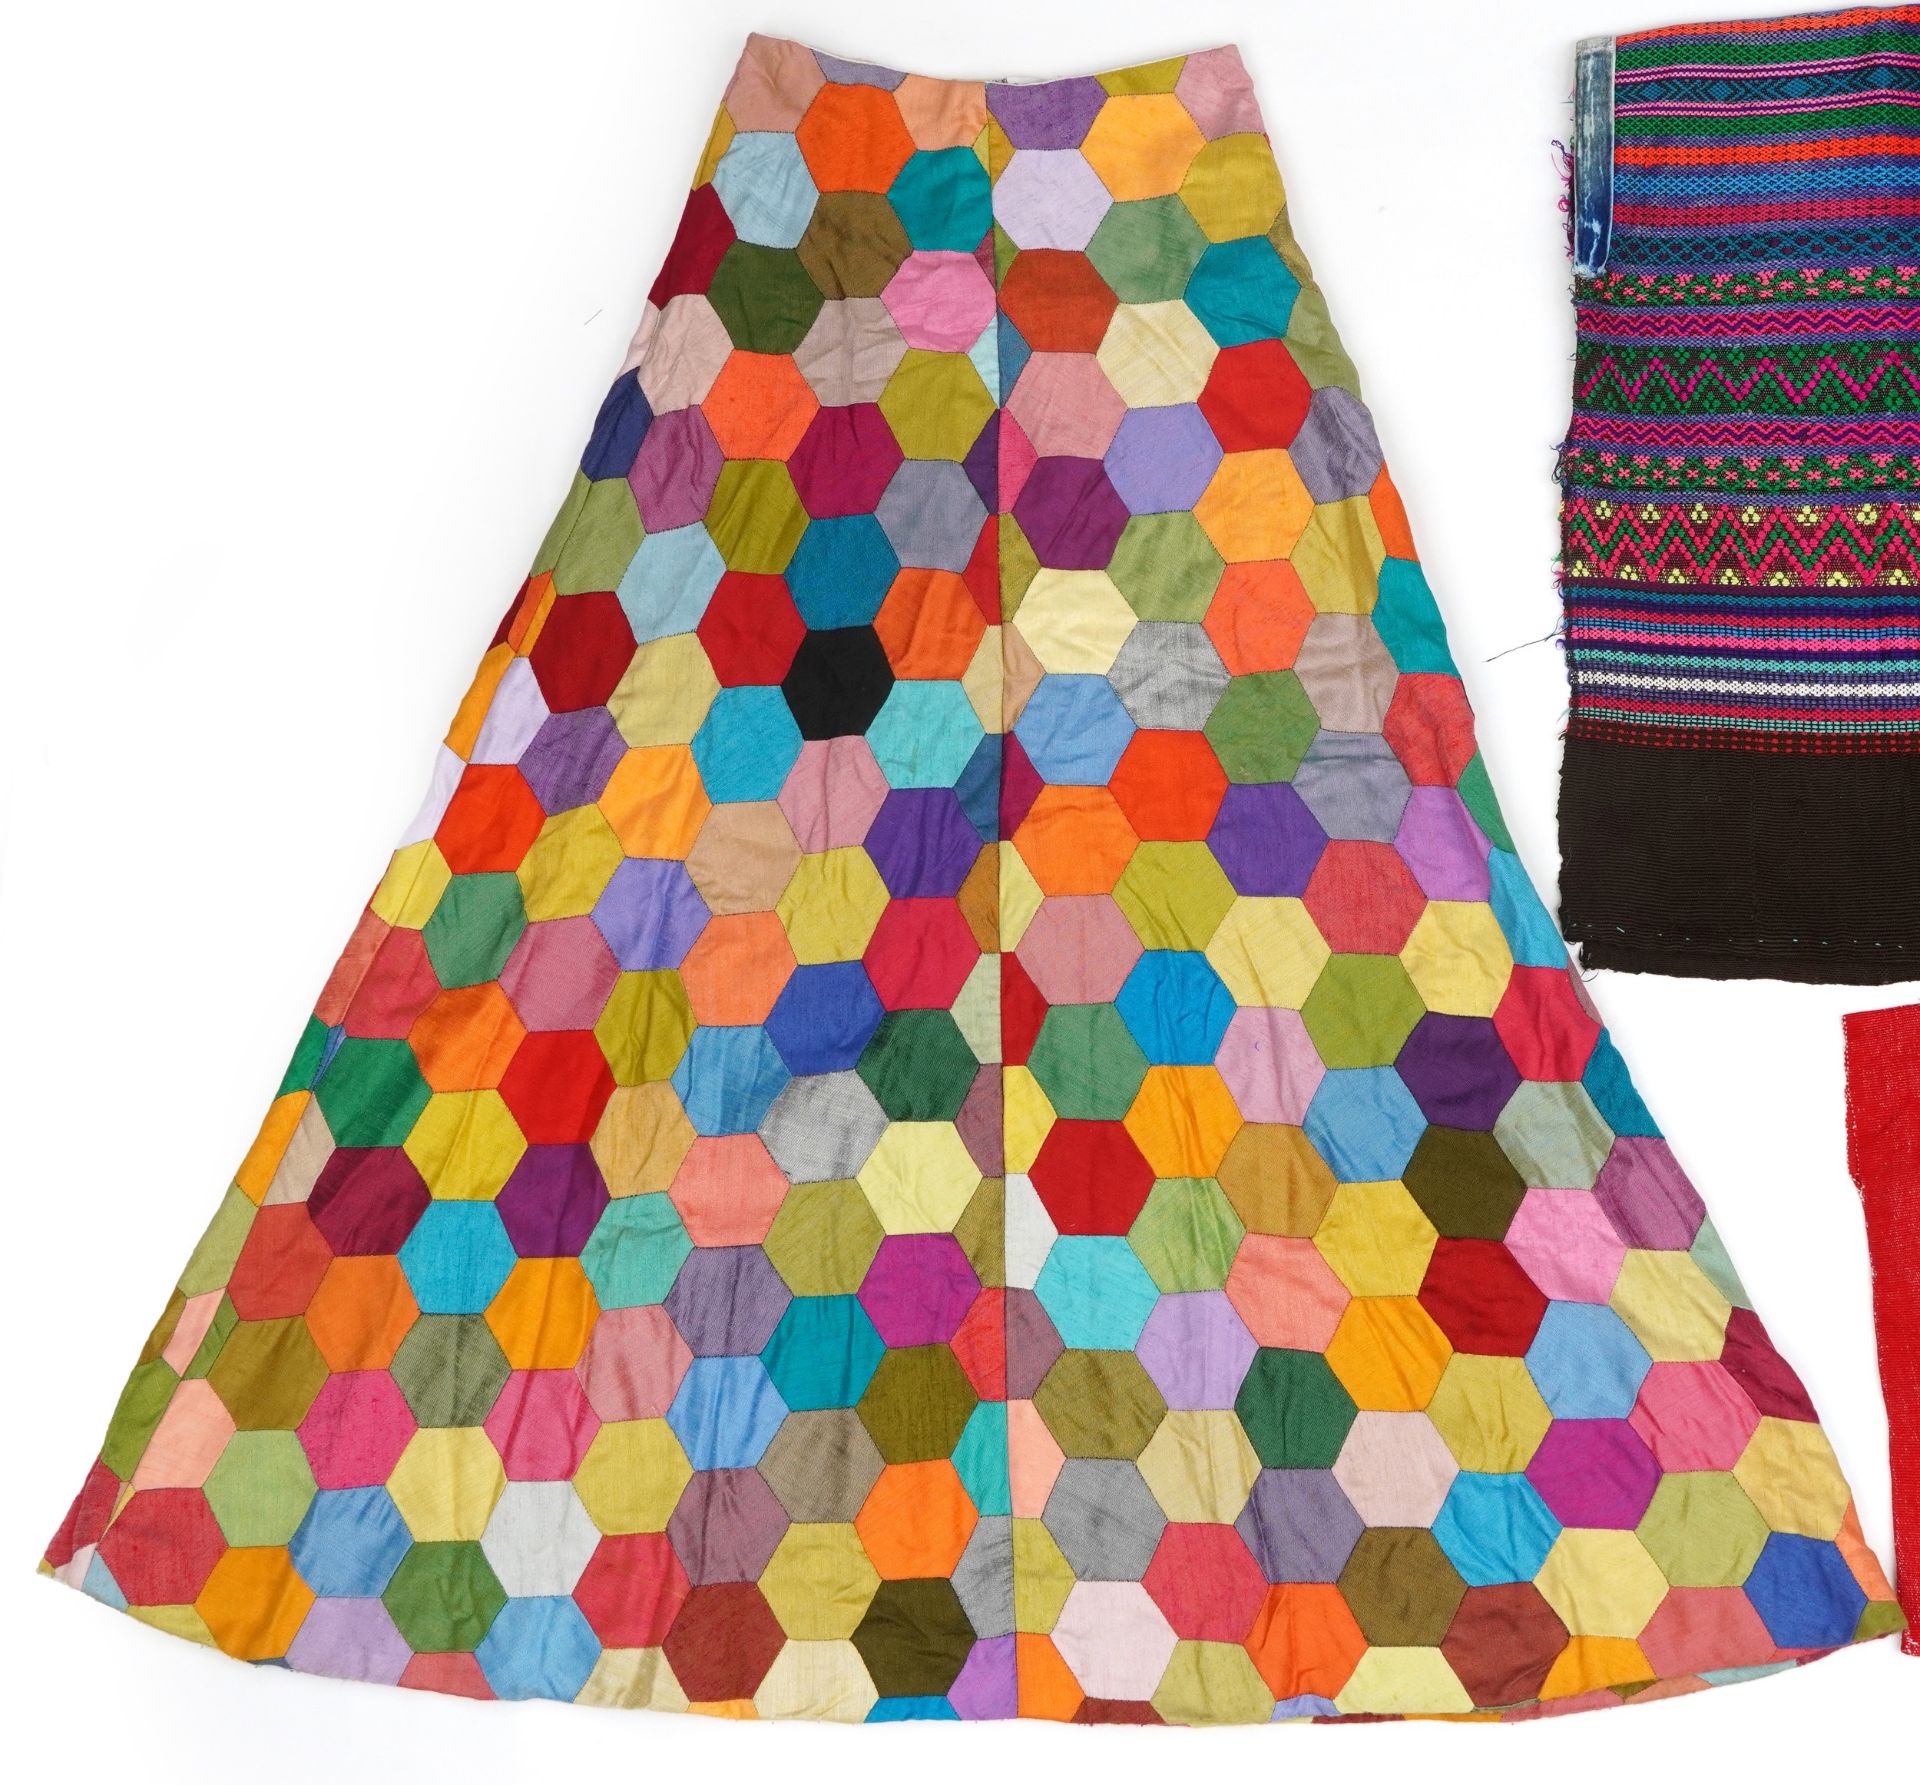 Vintage hexagonal patchwork skirt, patterned Hungarian poncho and Point de Hongrie upholstery - Bild 15 aus 24